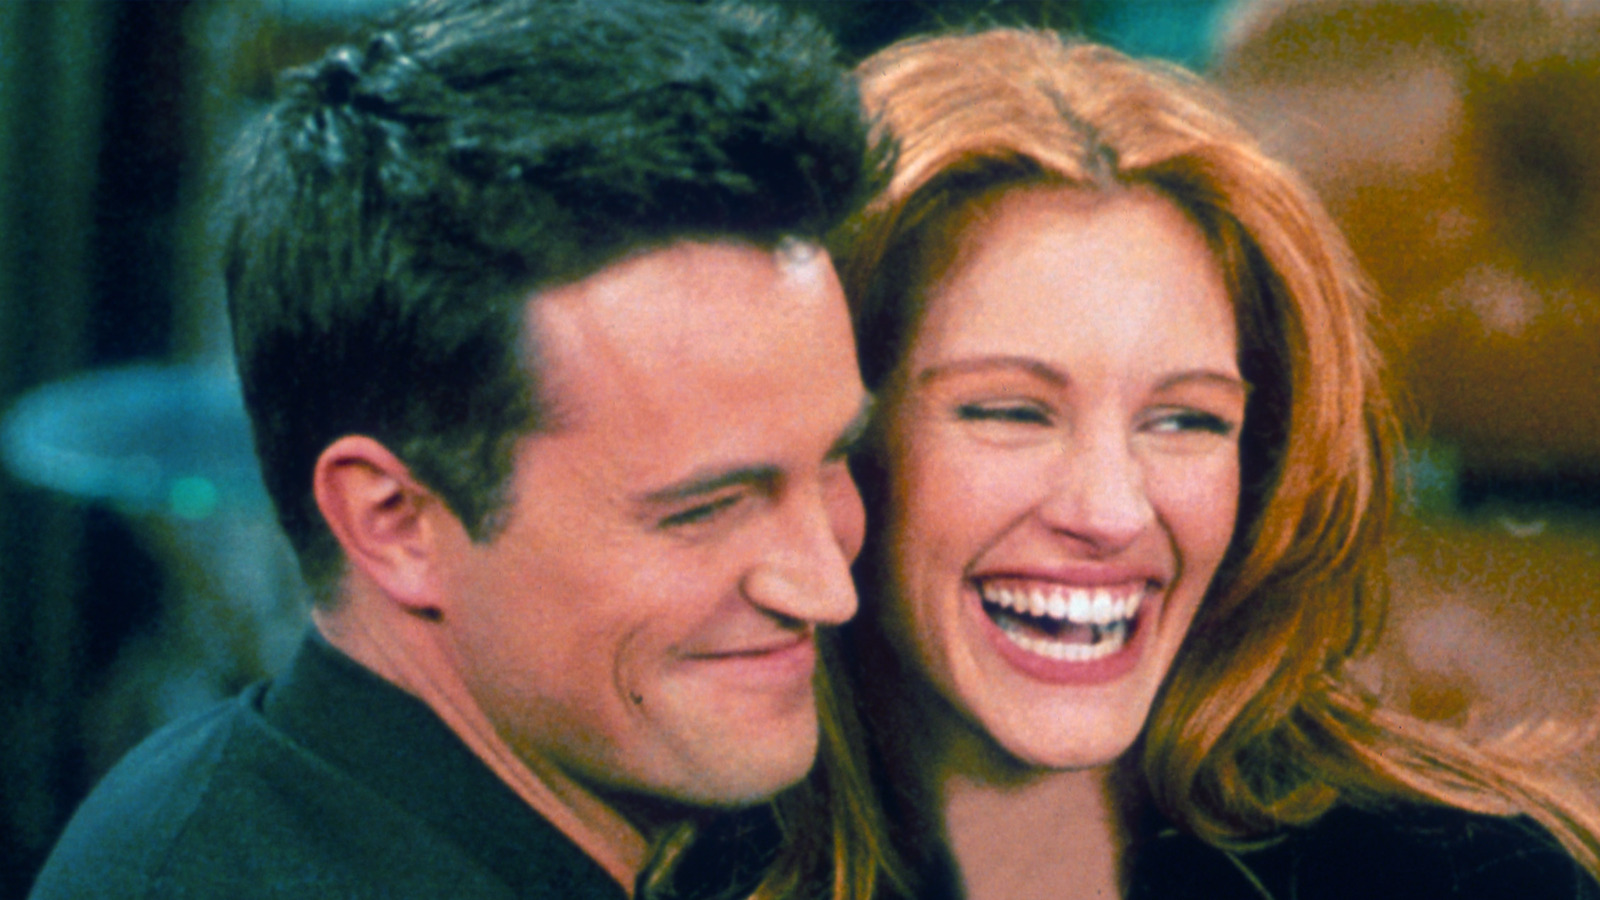 Matthew Perry broke up with Julia Roberts after two months of dating